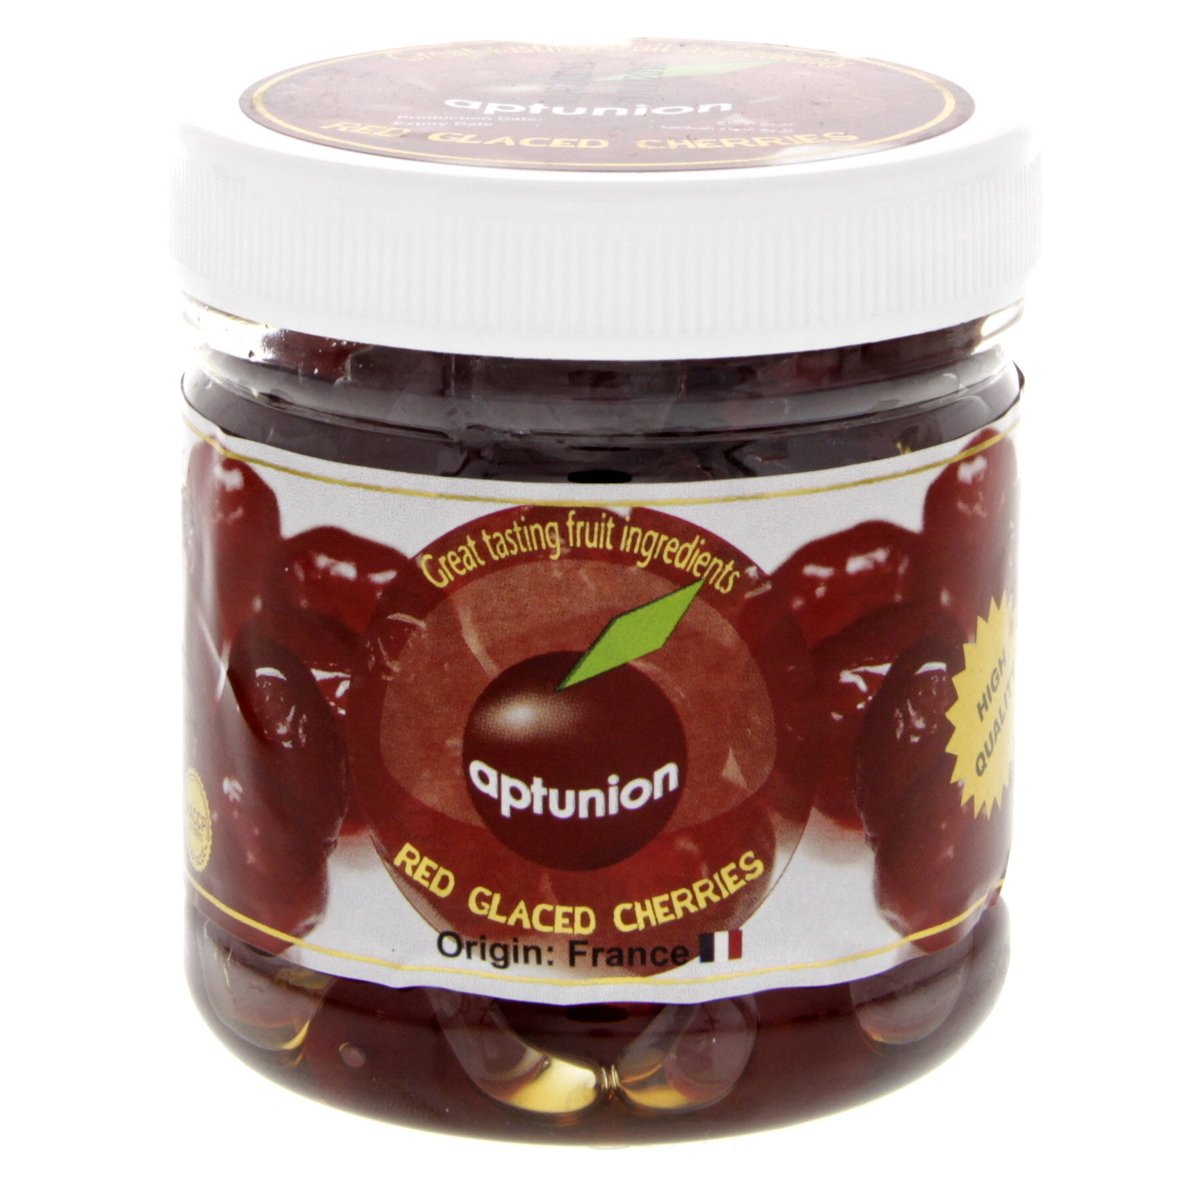 Aptunion Red Glaced Cherries 200 g